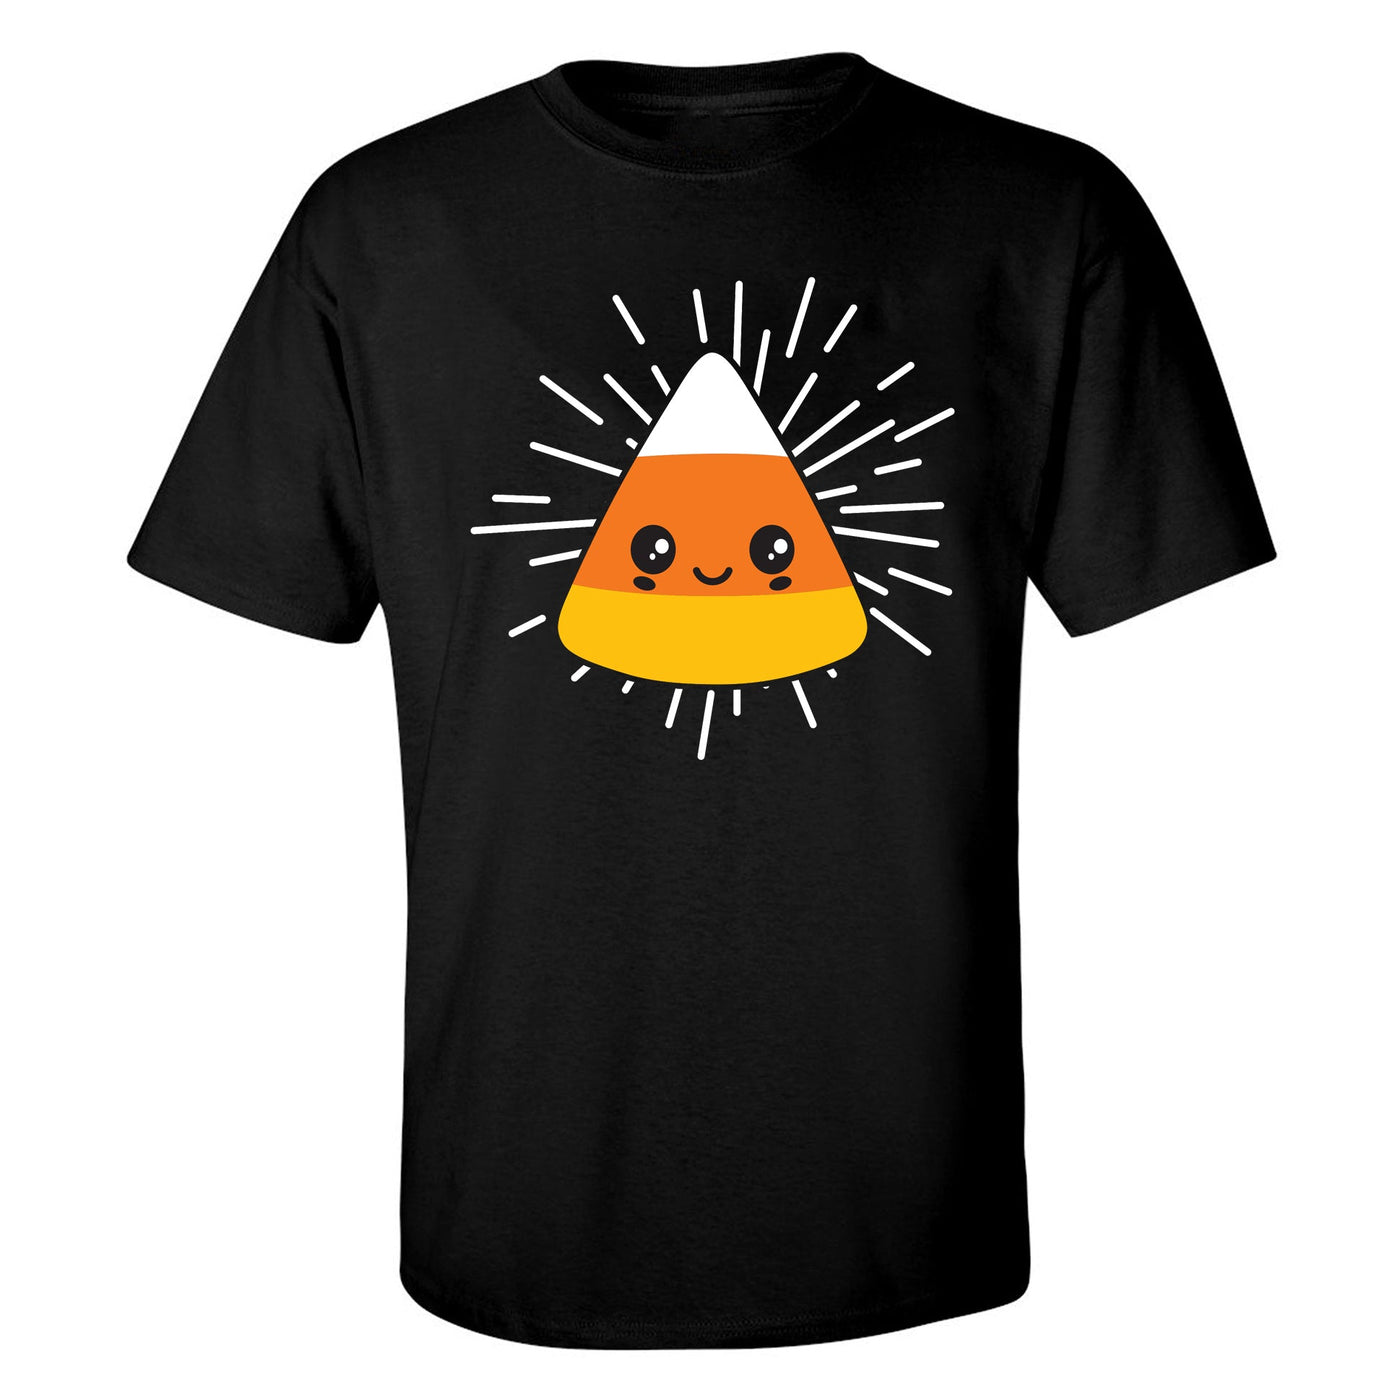 SPECIAL "Candy Corn" Short Sleeve T-Shirt